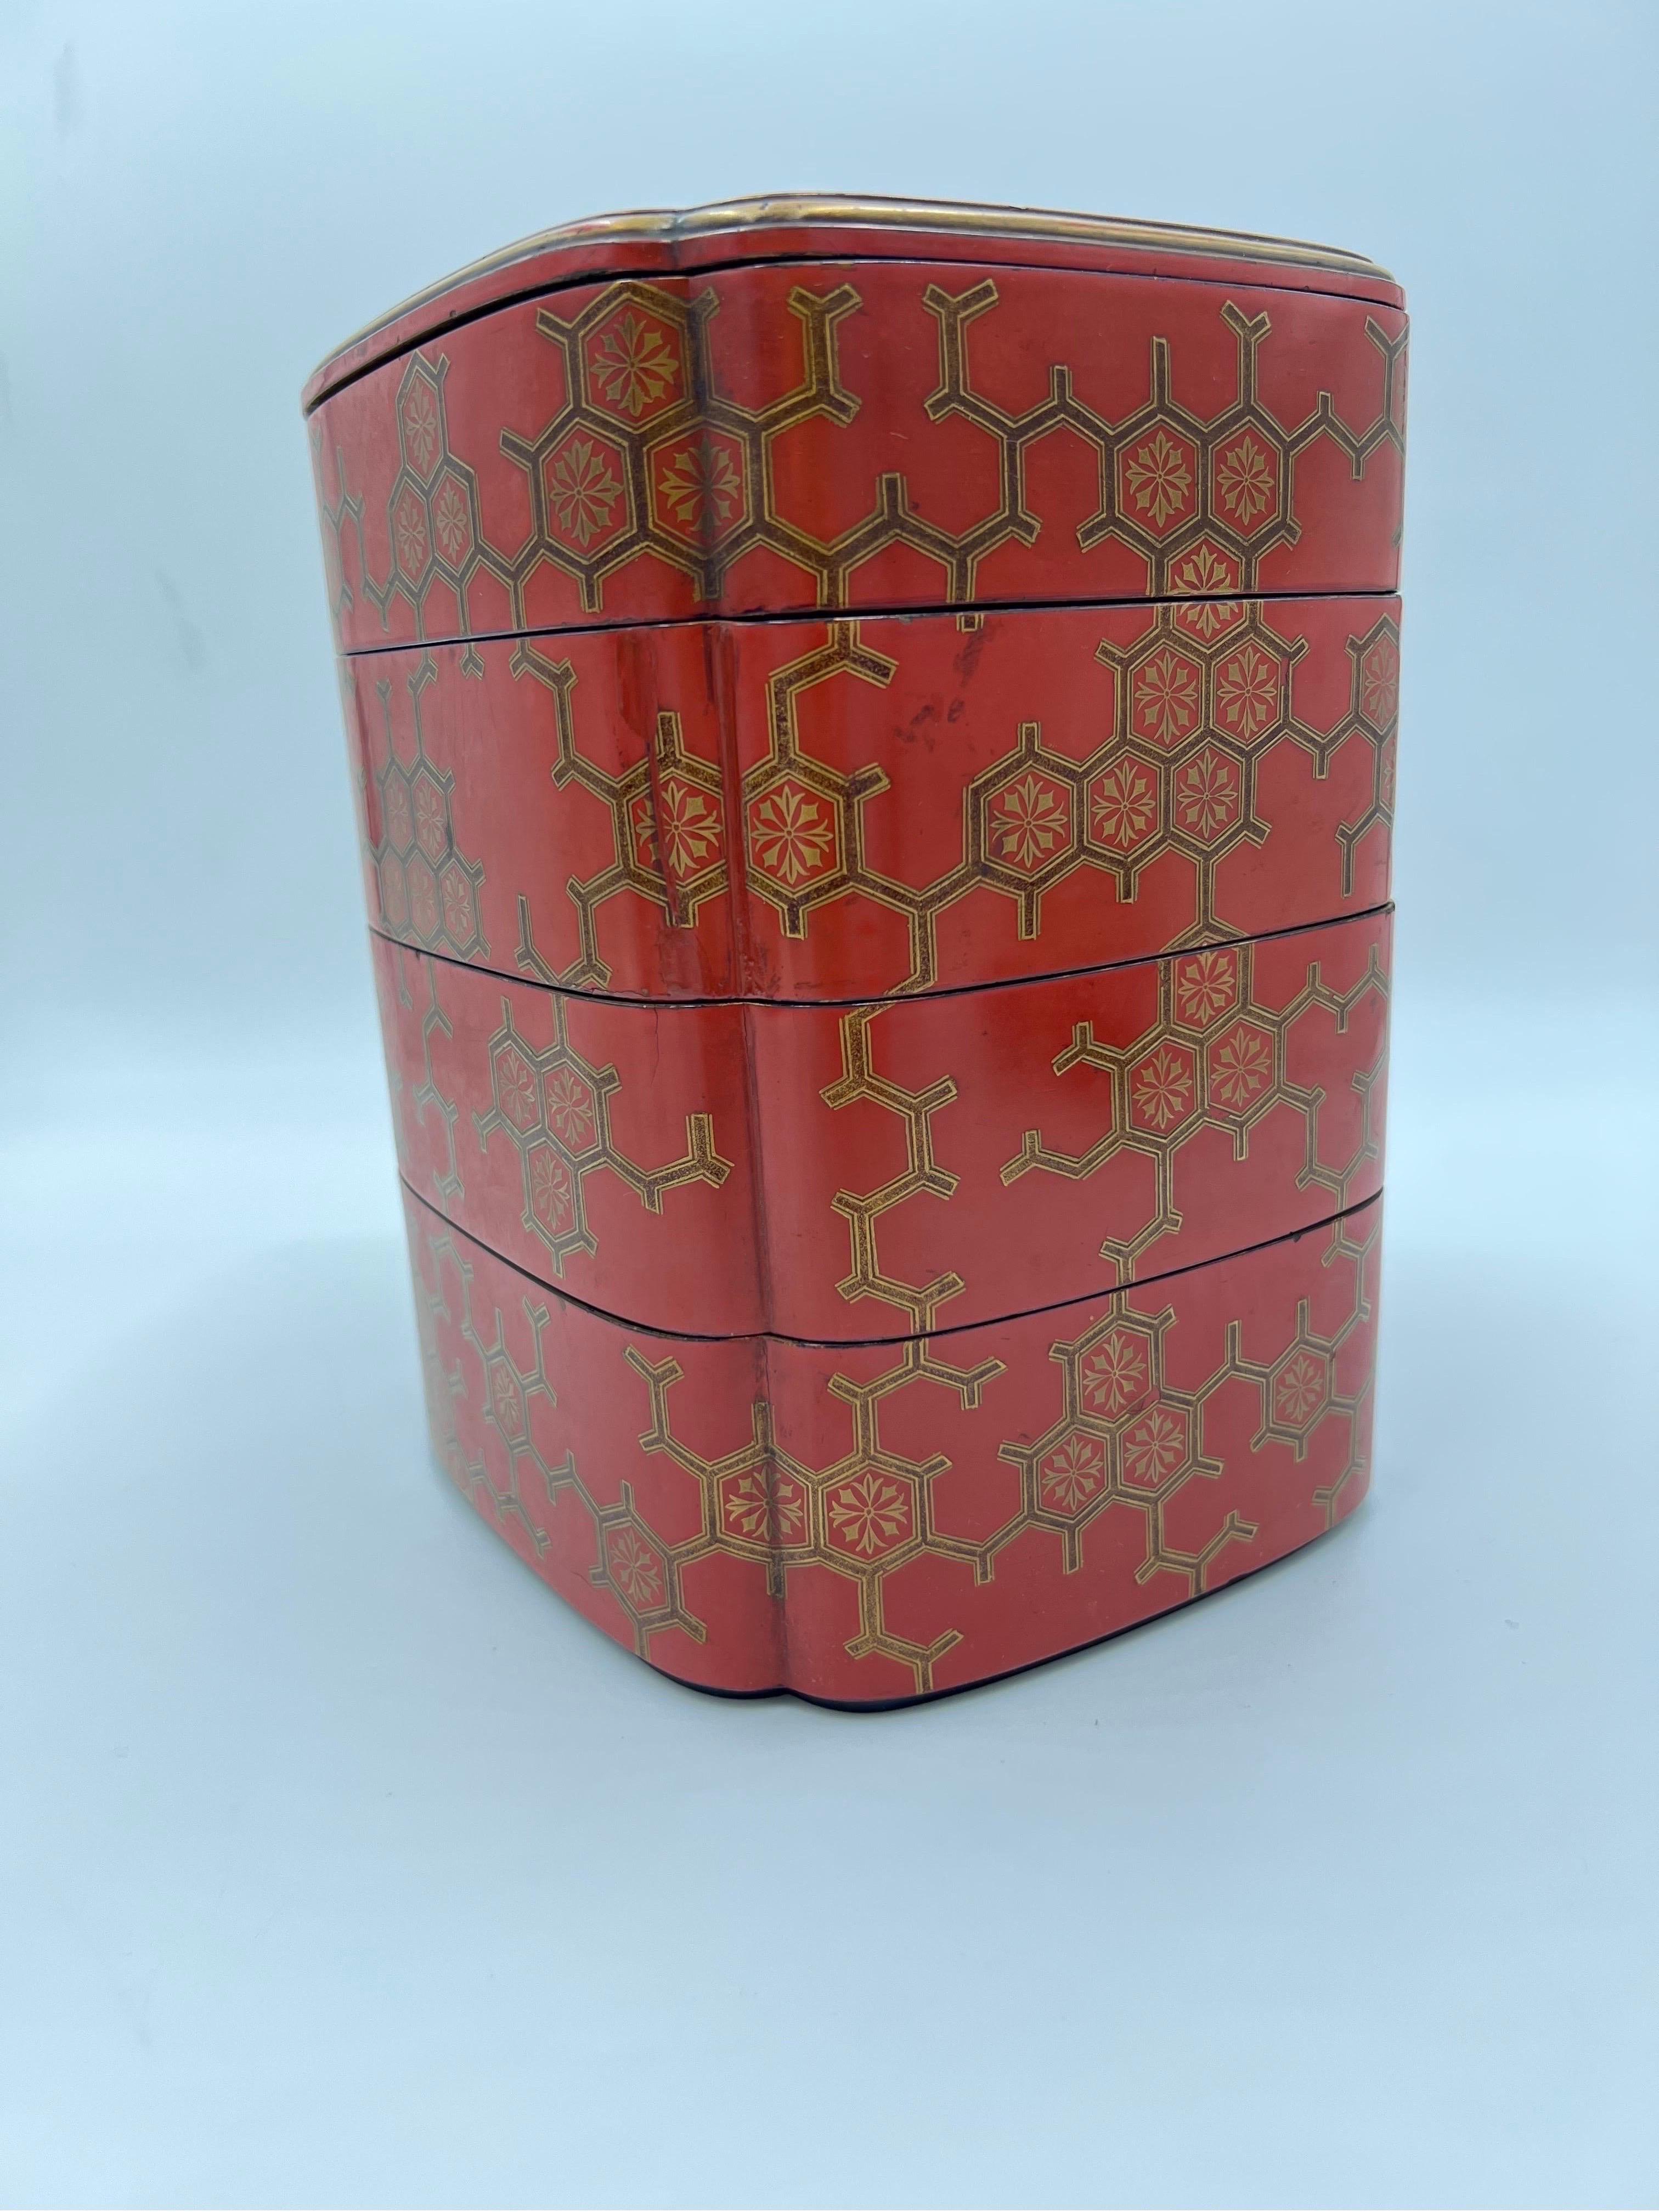 An antique Japanese red lacquerware bento box. Constructed in 5 pieces with 4 compartments, each having a gilt border, chromosomal style decoration to body and scalloped corners. Unmarked.